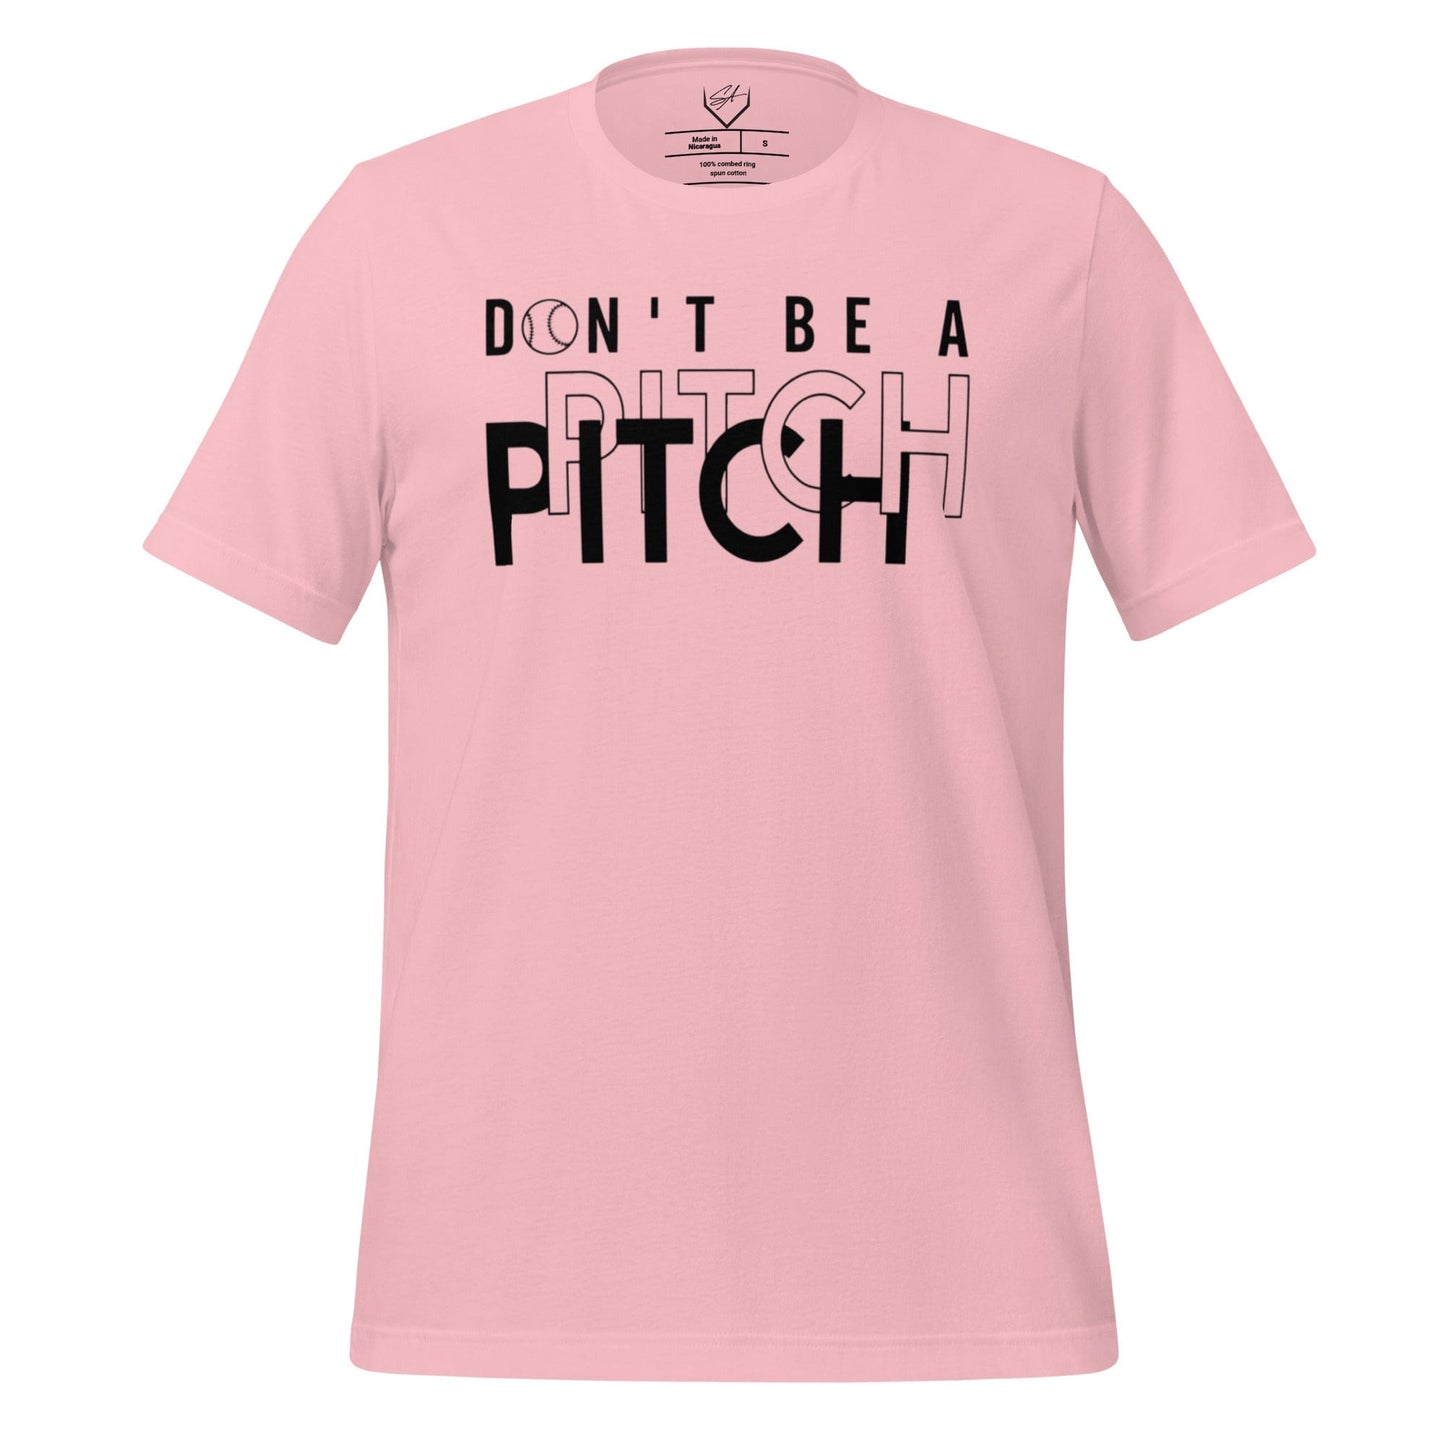 Don't Be A Pitch - Adult Tee